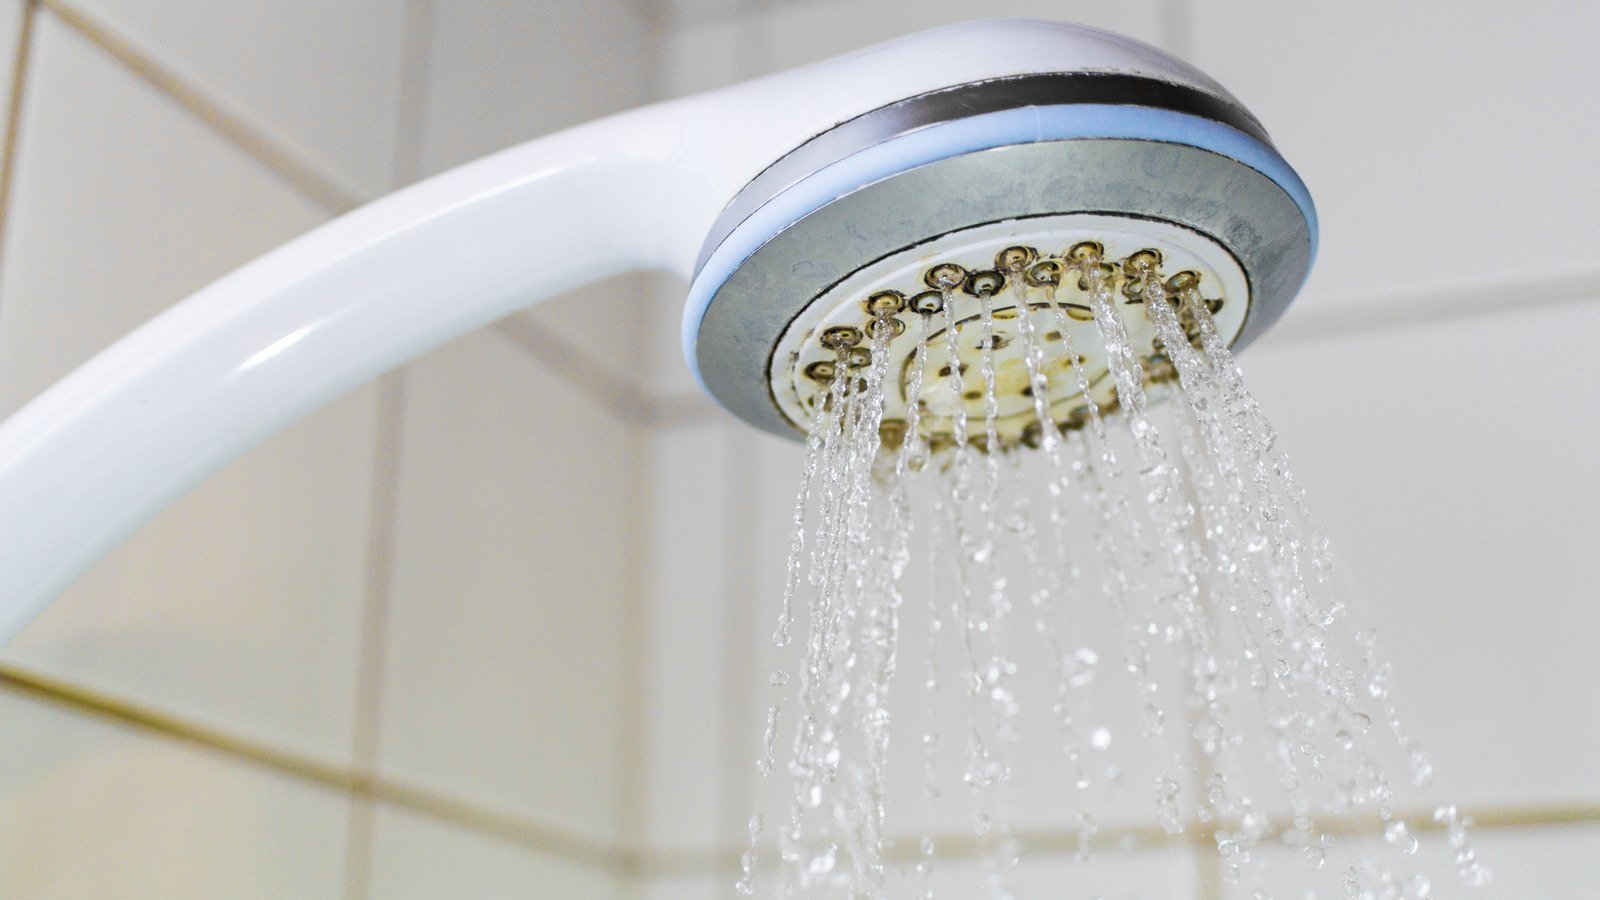 The Simple WD-40 Hack That'll Fix A Clogged Shower Head